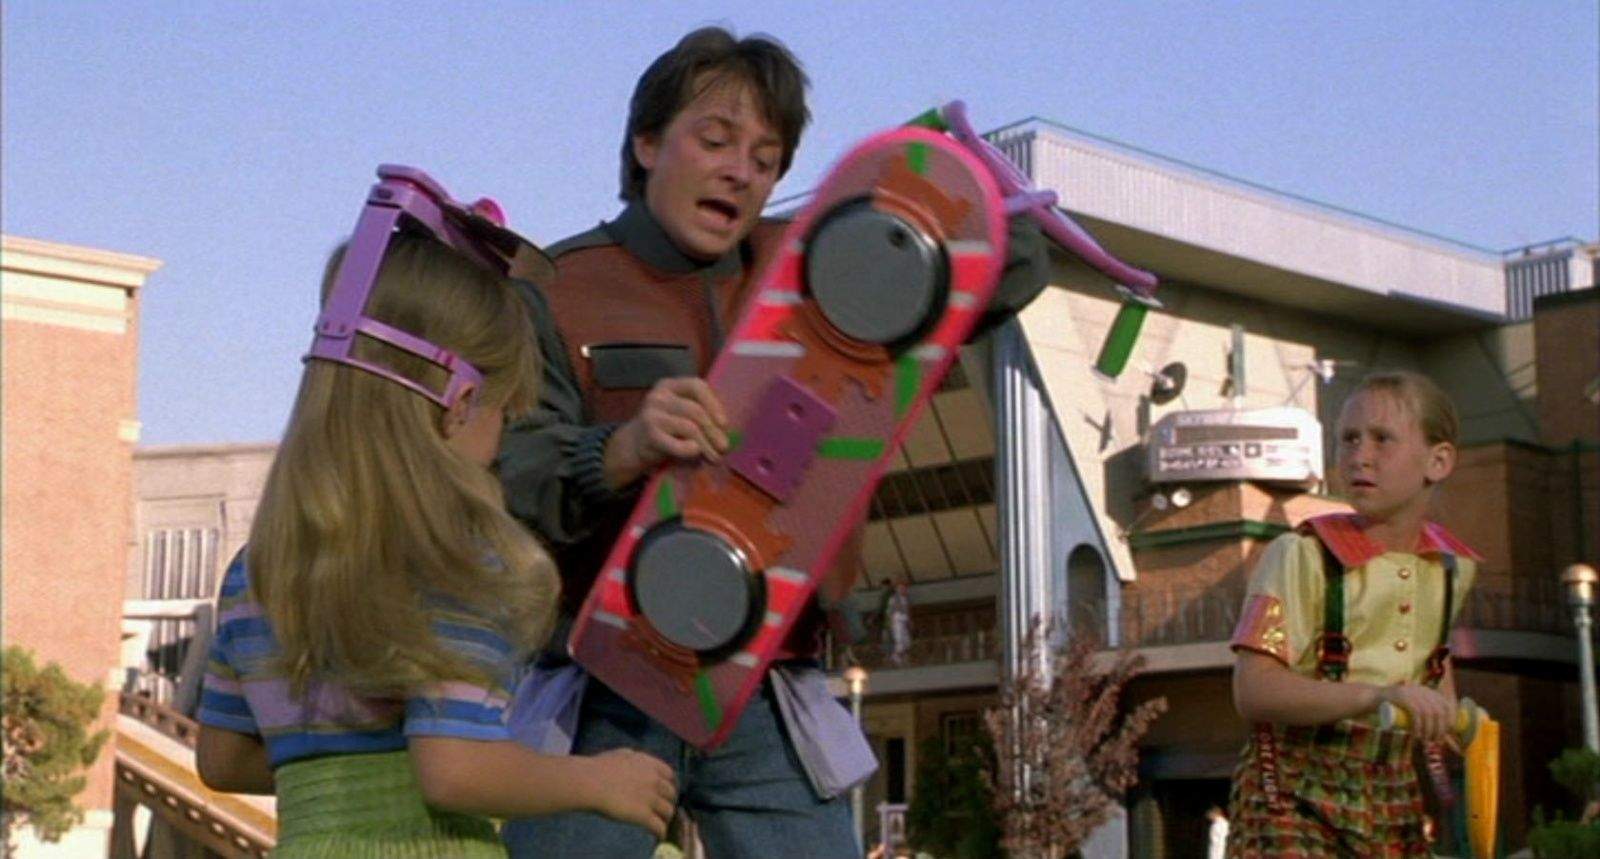 Granted, the future portrayed in Back to the Future Part II is only Oct. 21, 2015, meaning that a whole lot needs to happen in a very short space of time if we’re going to have a hope of catching up. To be honest, we’d skip most of it, so long as someone would hurry up and invent a hoverboard. Hey, at least Nike is planning to release self-tying Power Laces next year to commemorate the movie.